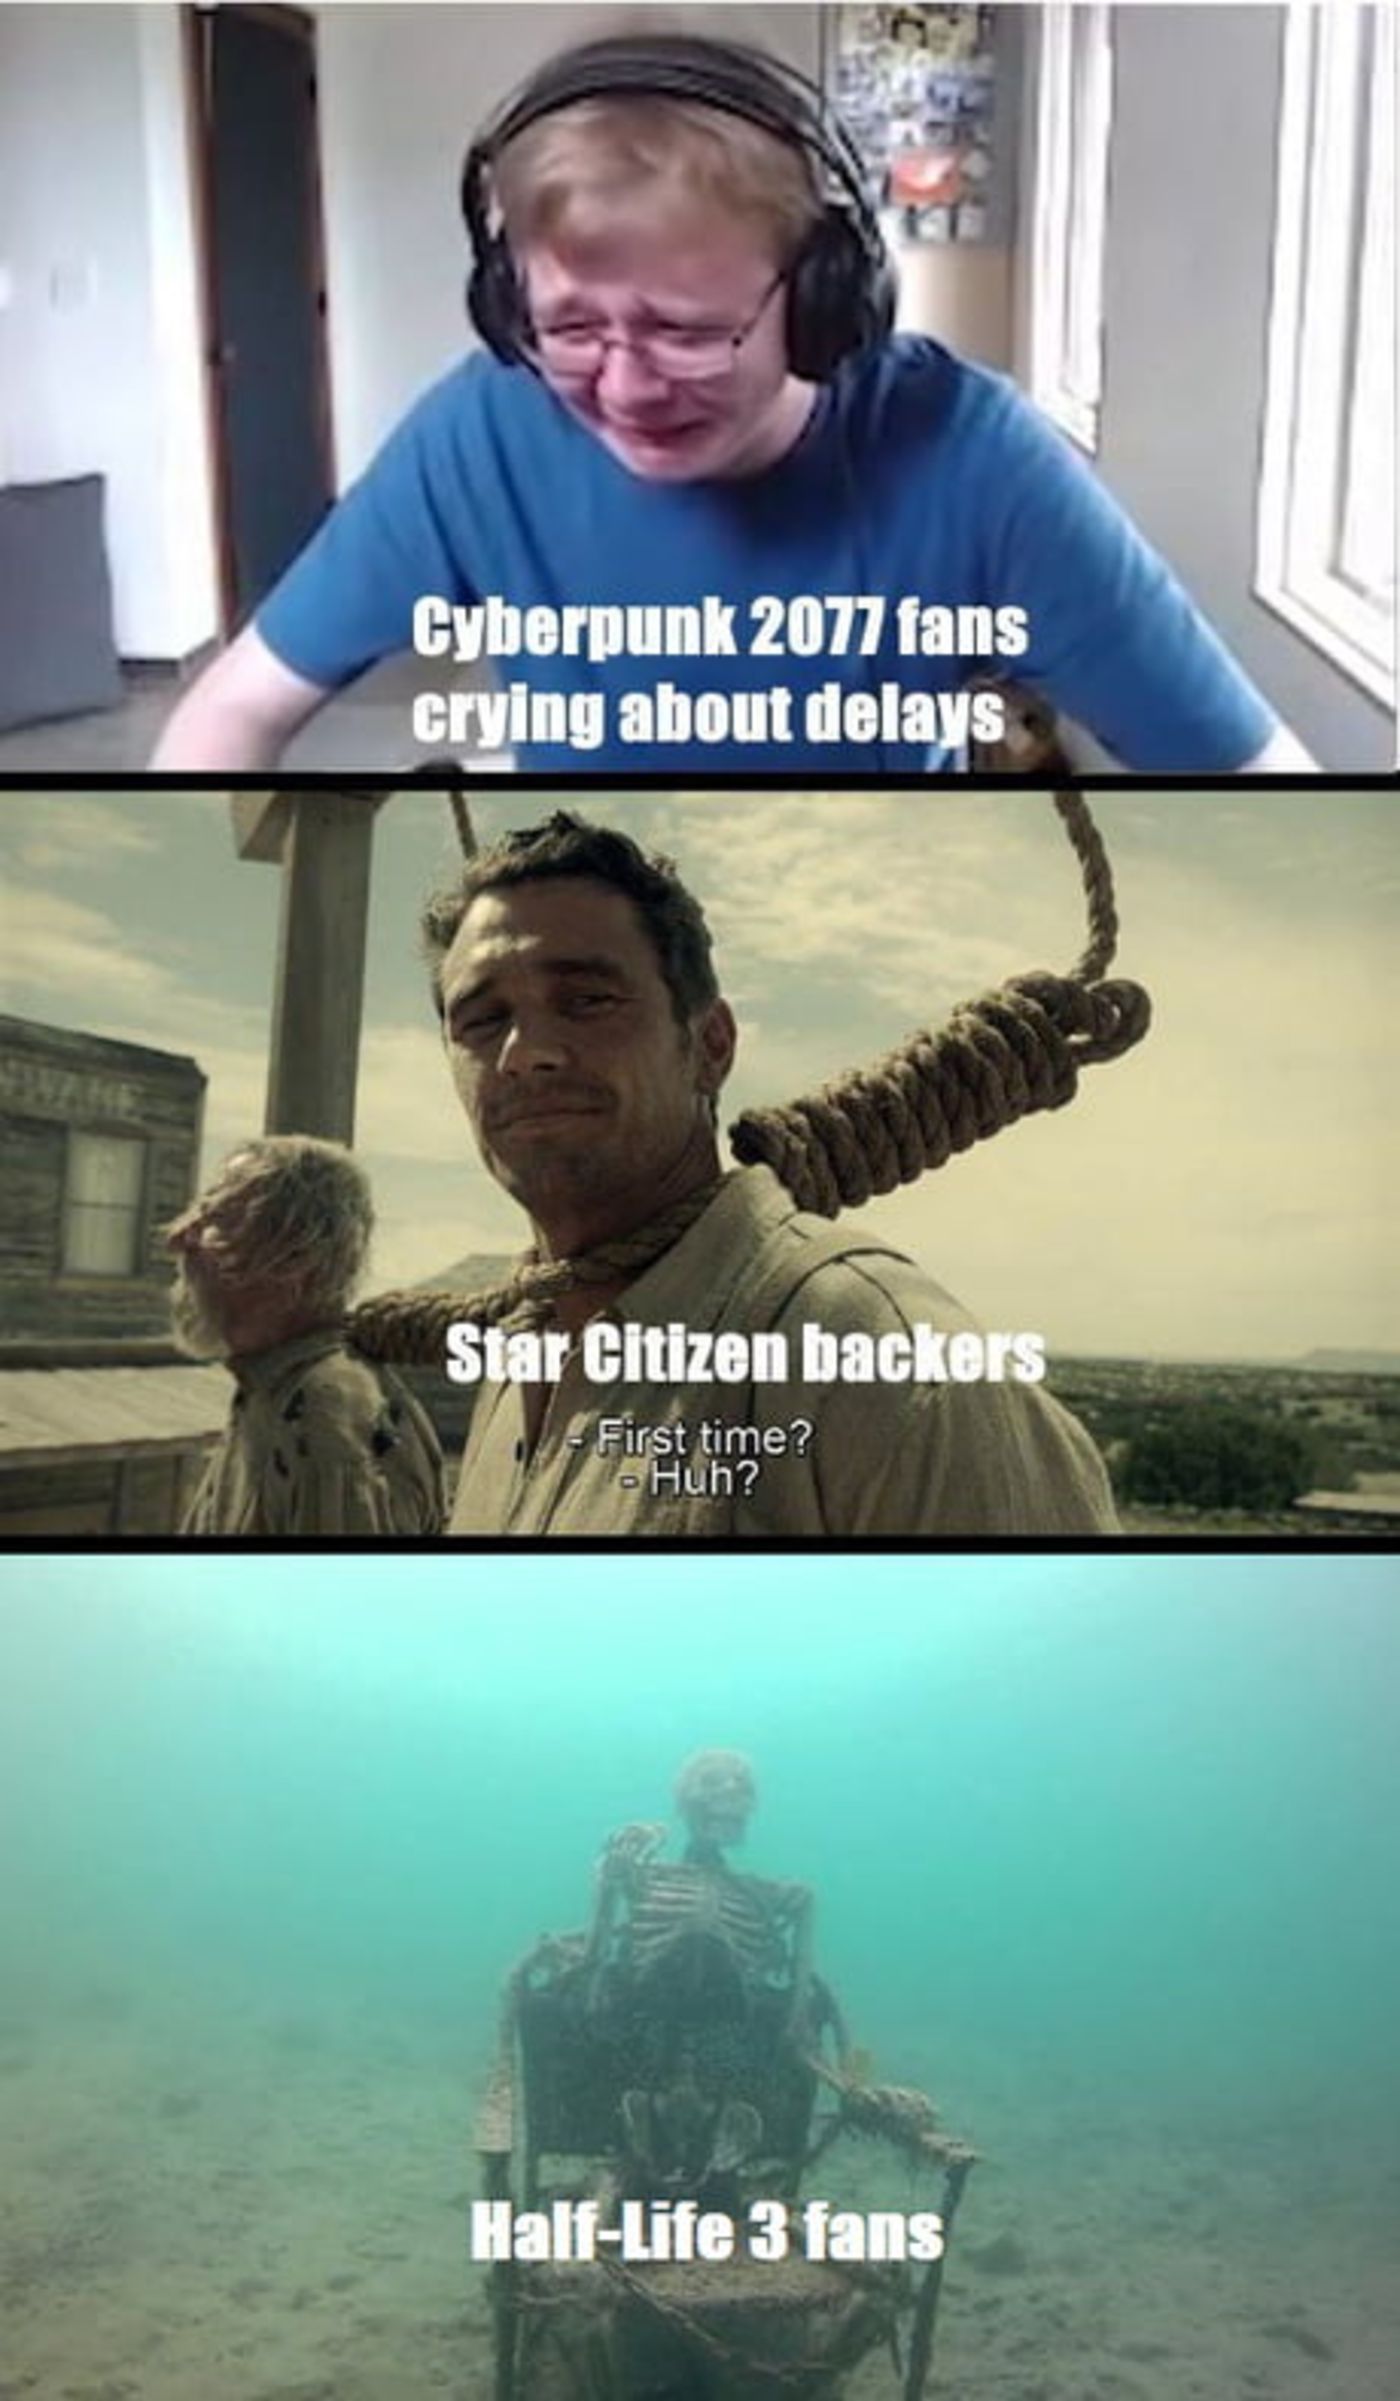 Cyberpunk 2077 delay compared to other game delays